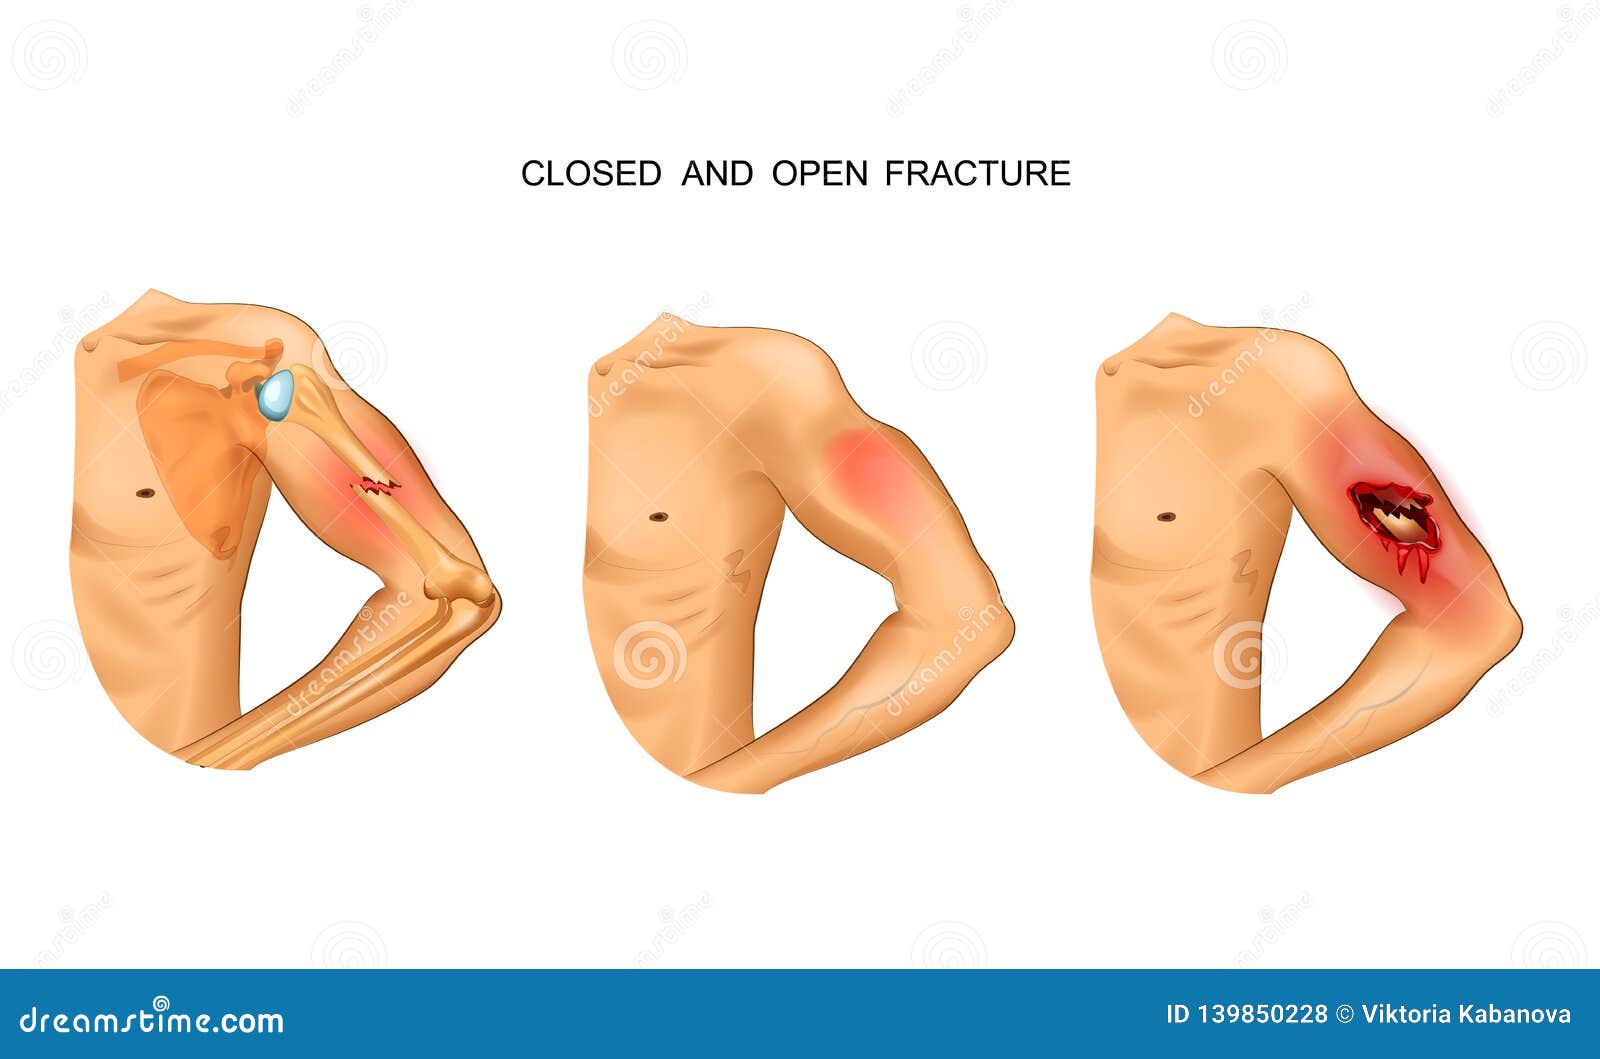 open and closed fracture